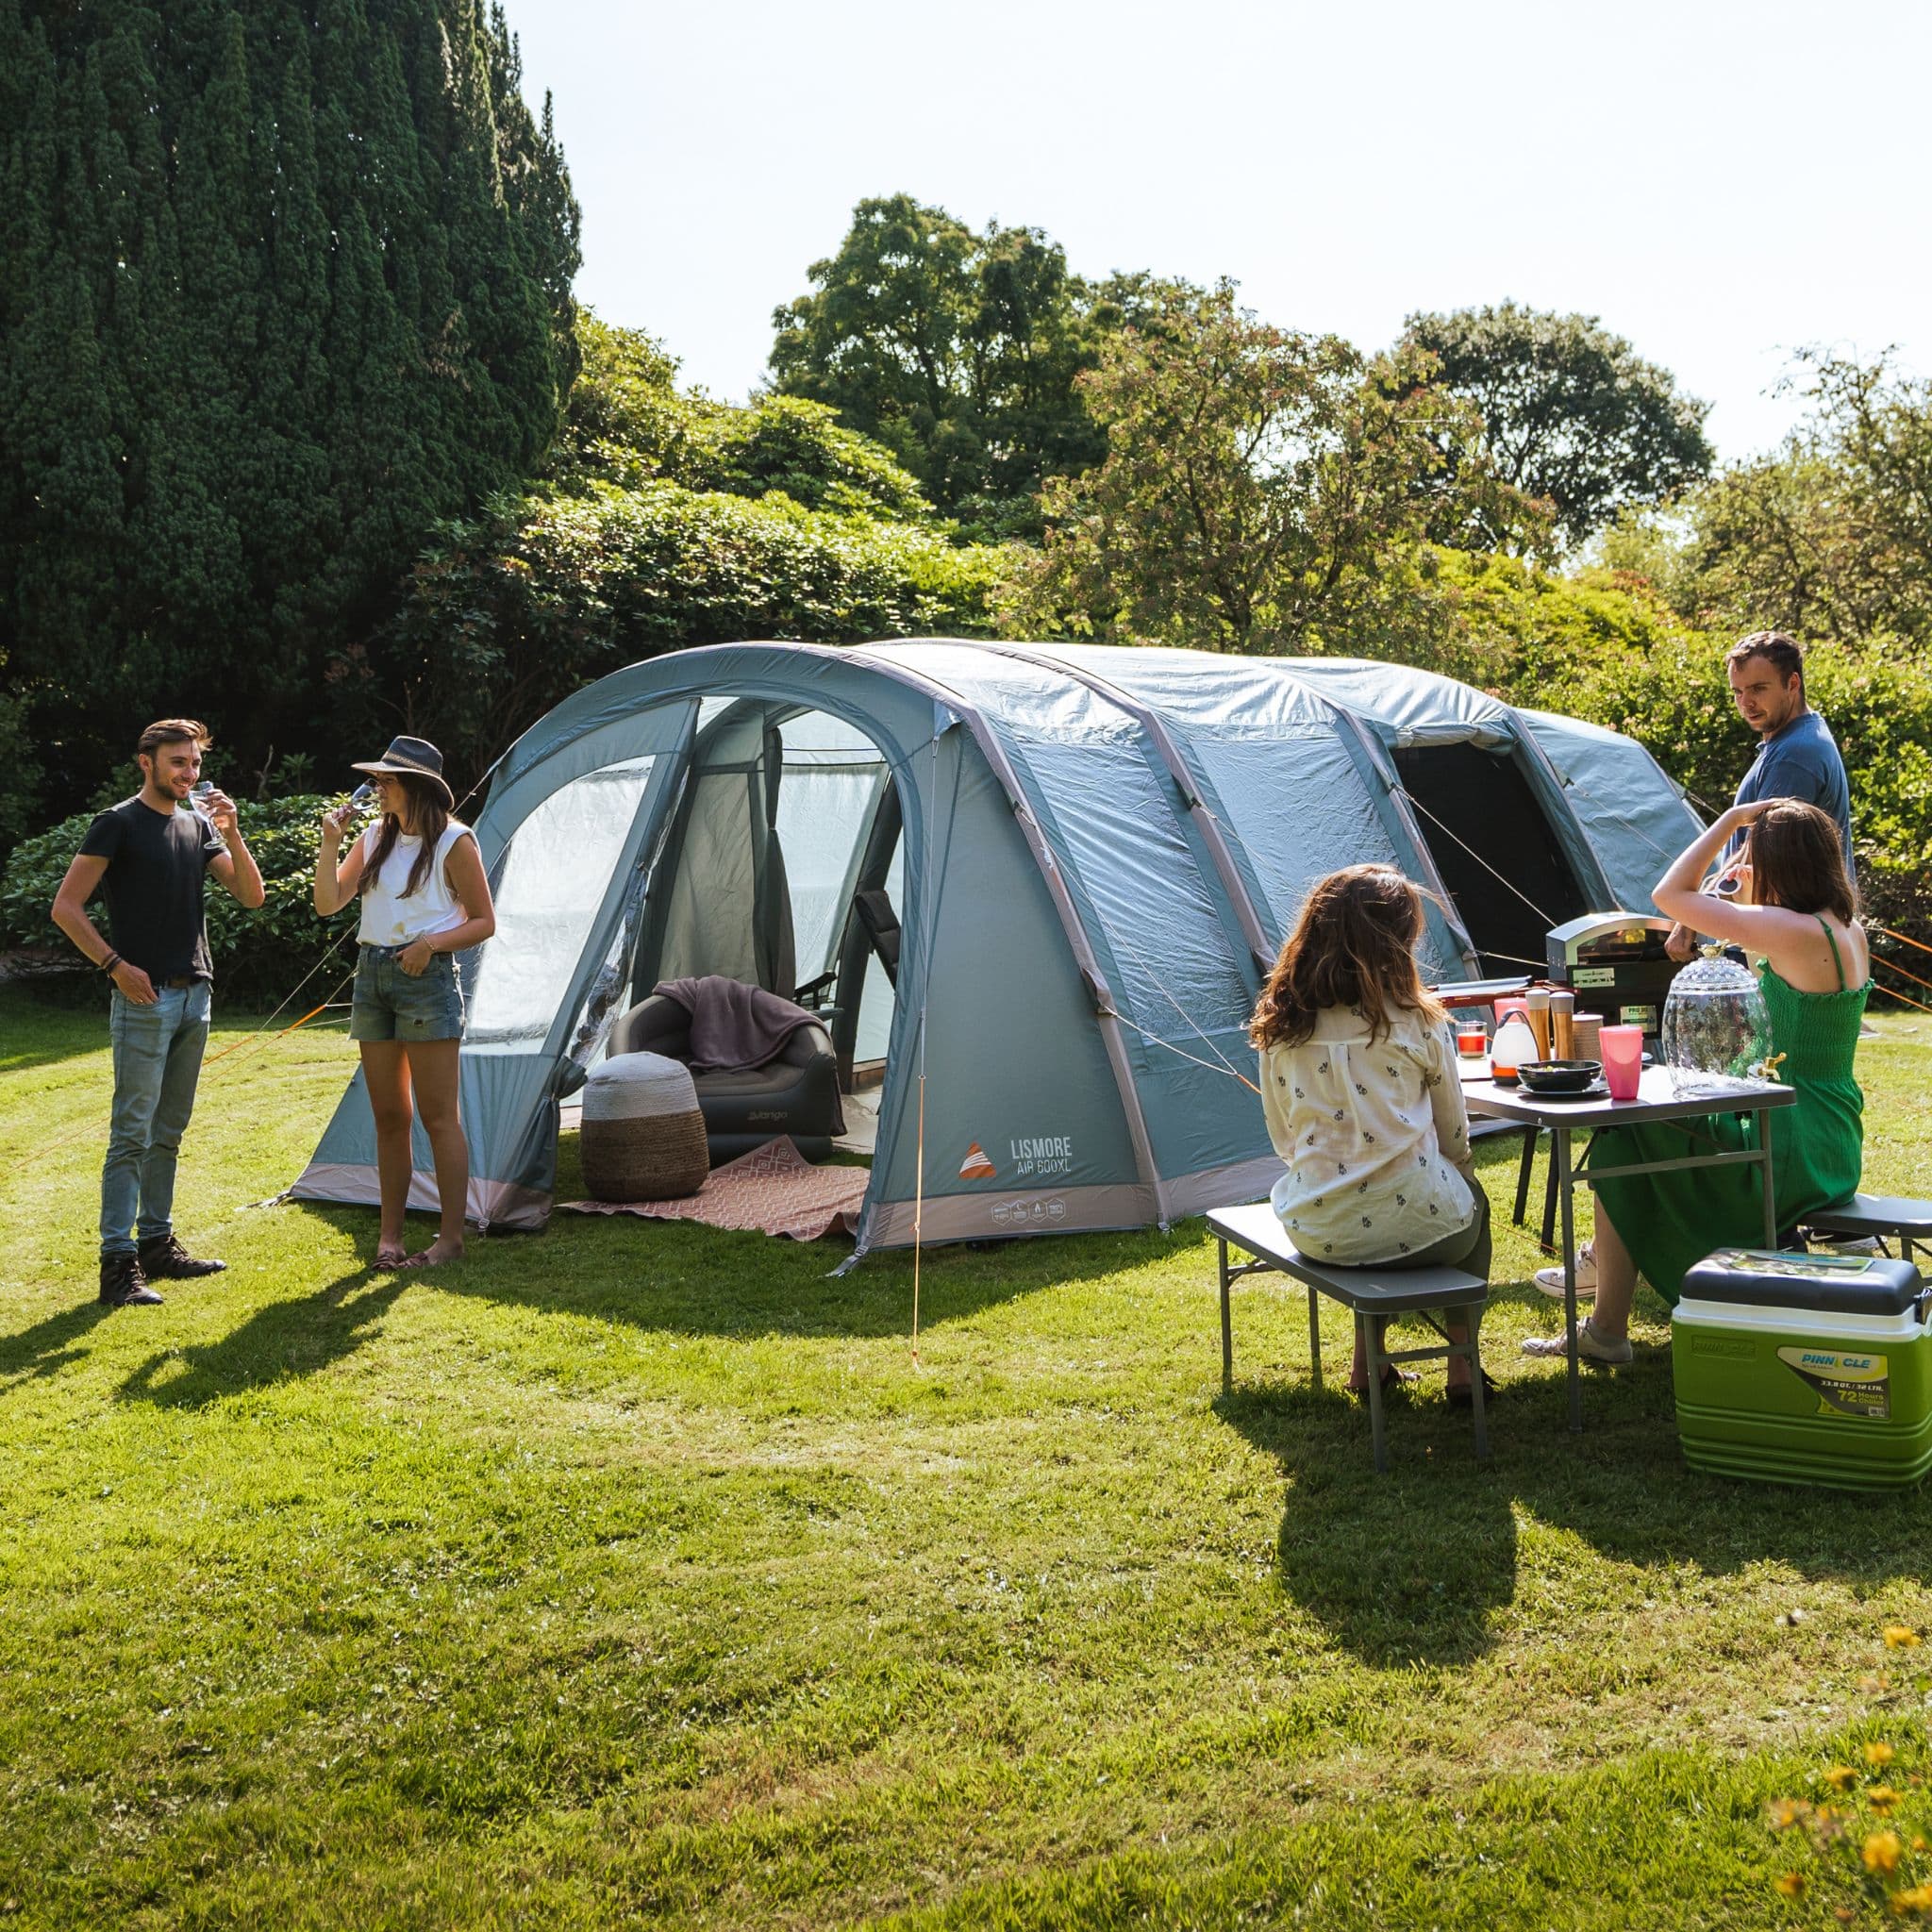 Tent Buying Guide - Adventure Tents, Family Tents, Weekend tent